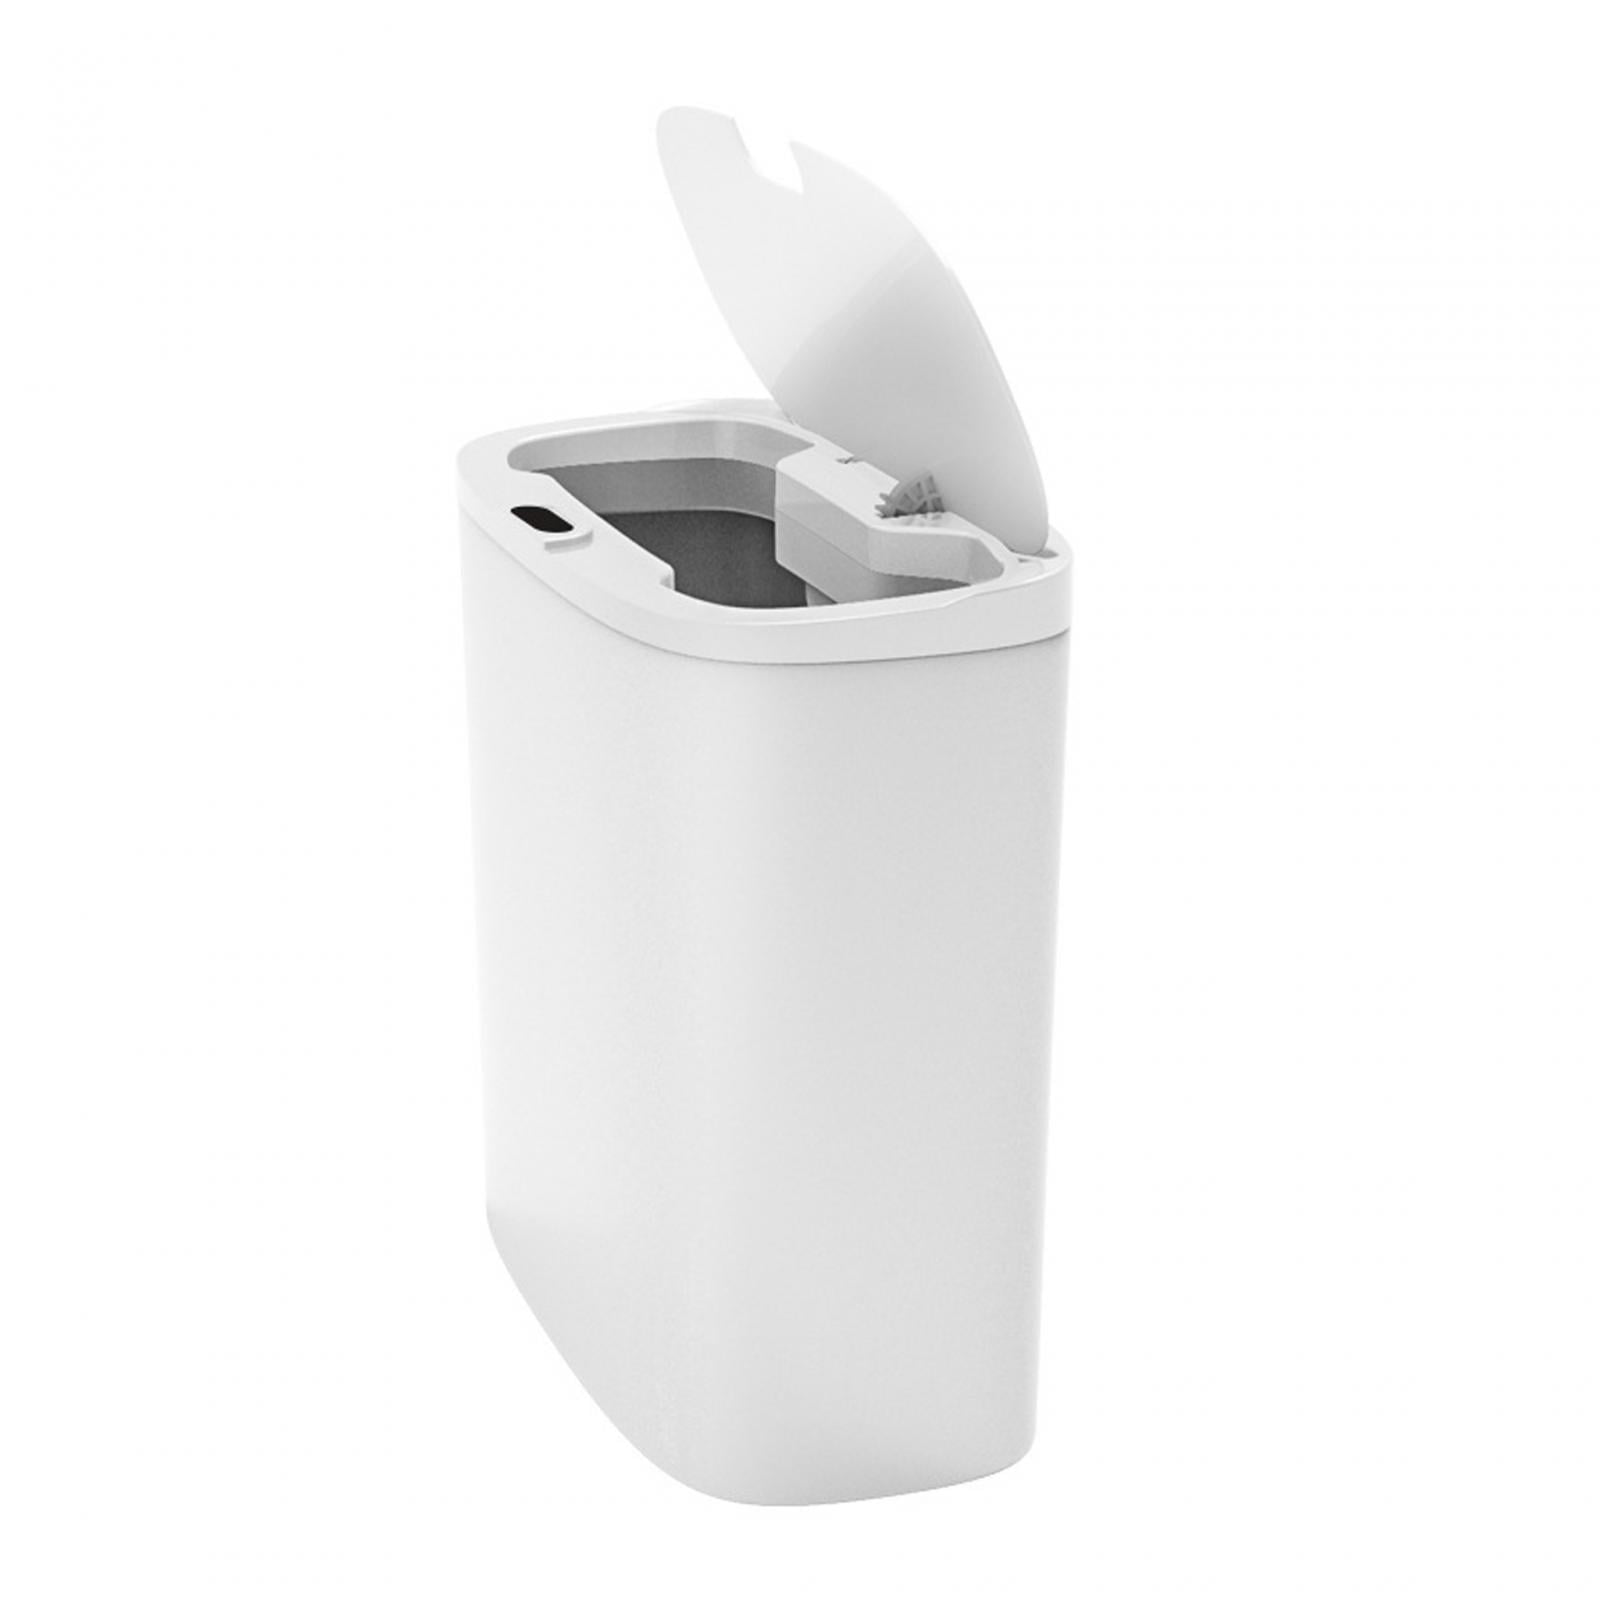 Touchless Trash Can, Electric Garbage Bin Toilet with Lid, Narrow ...